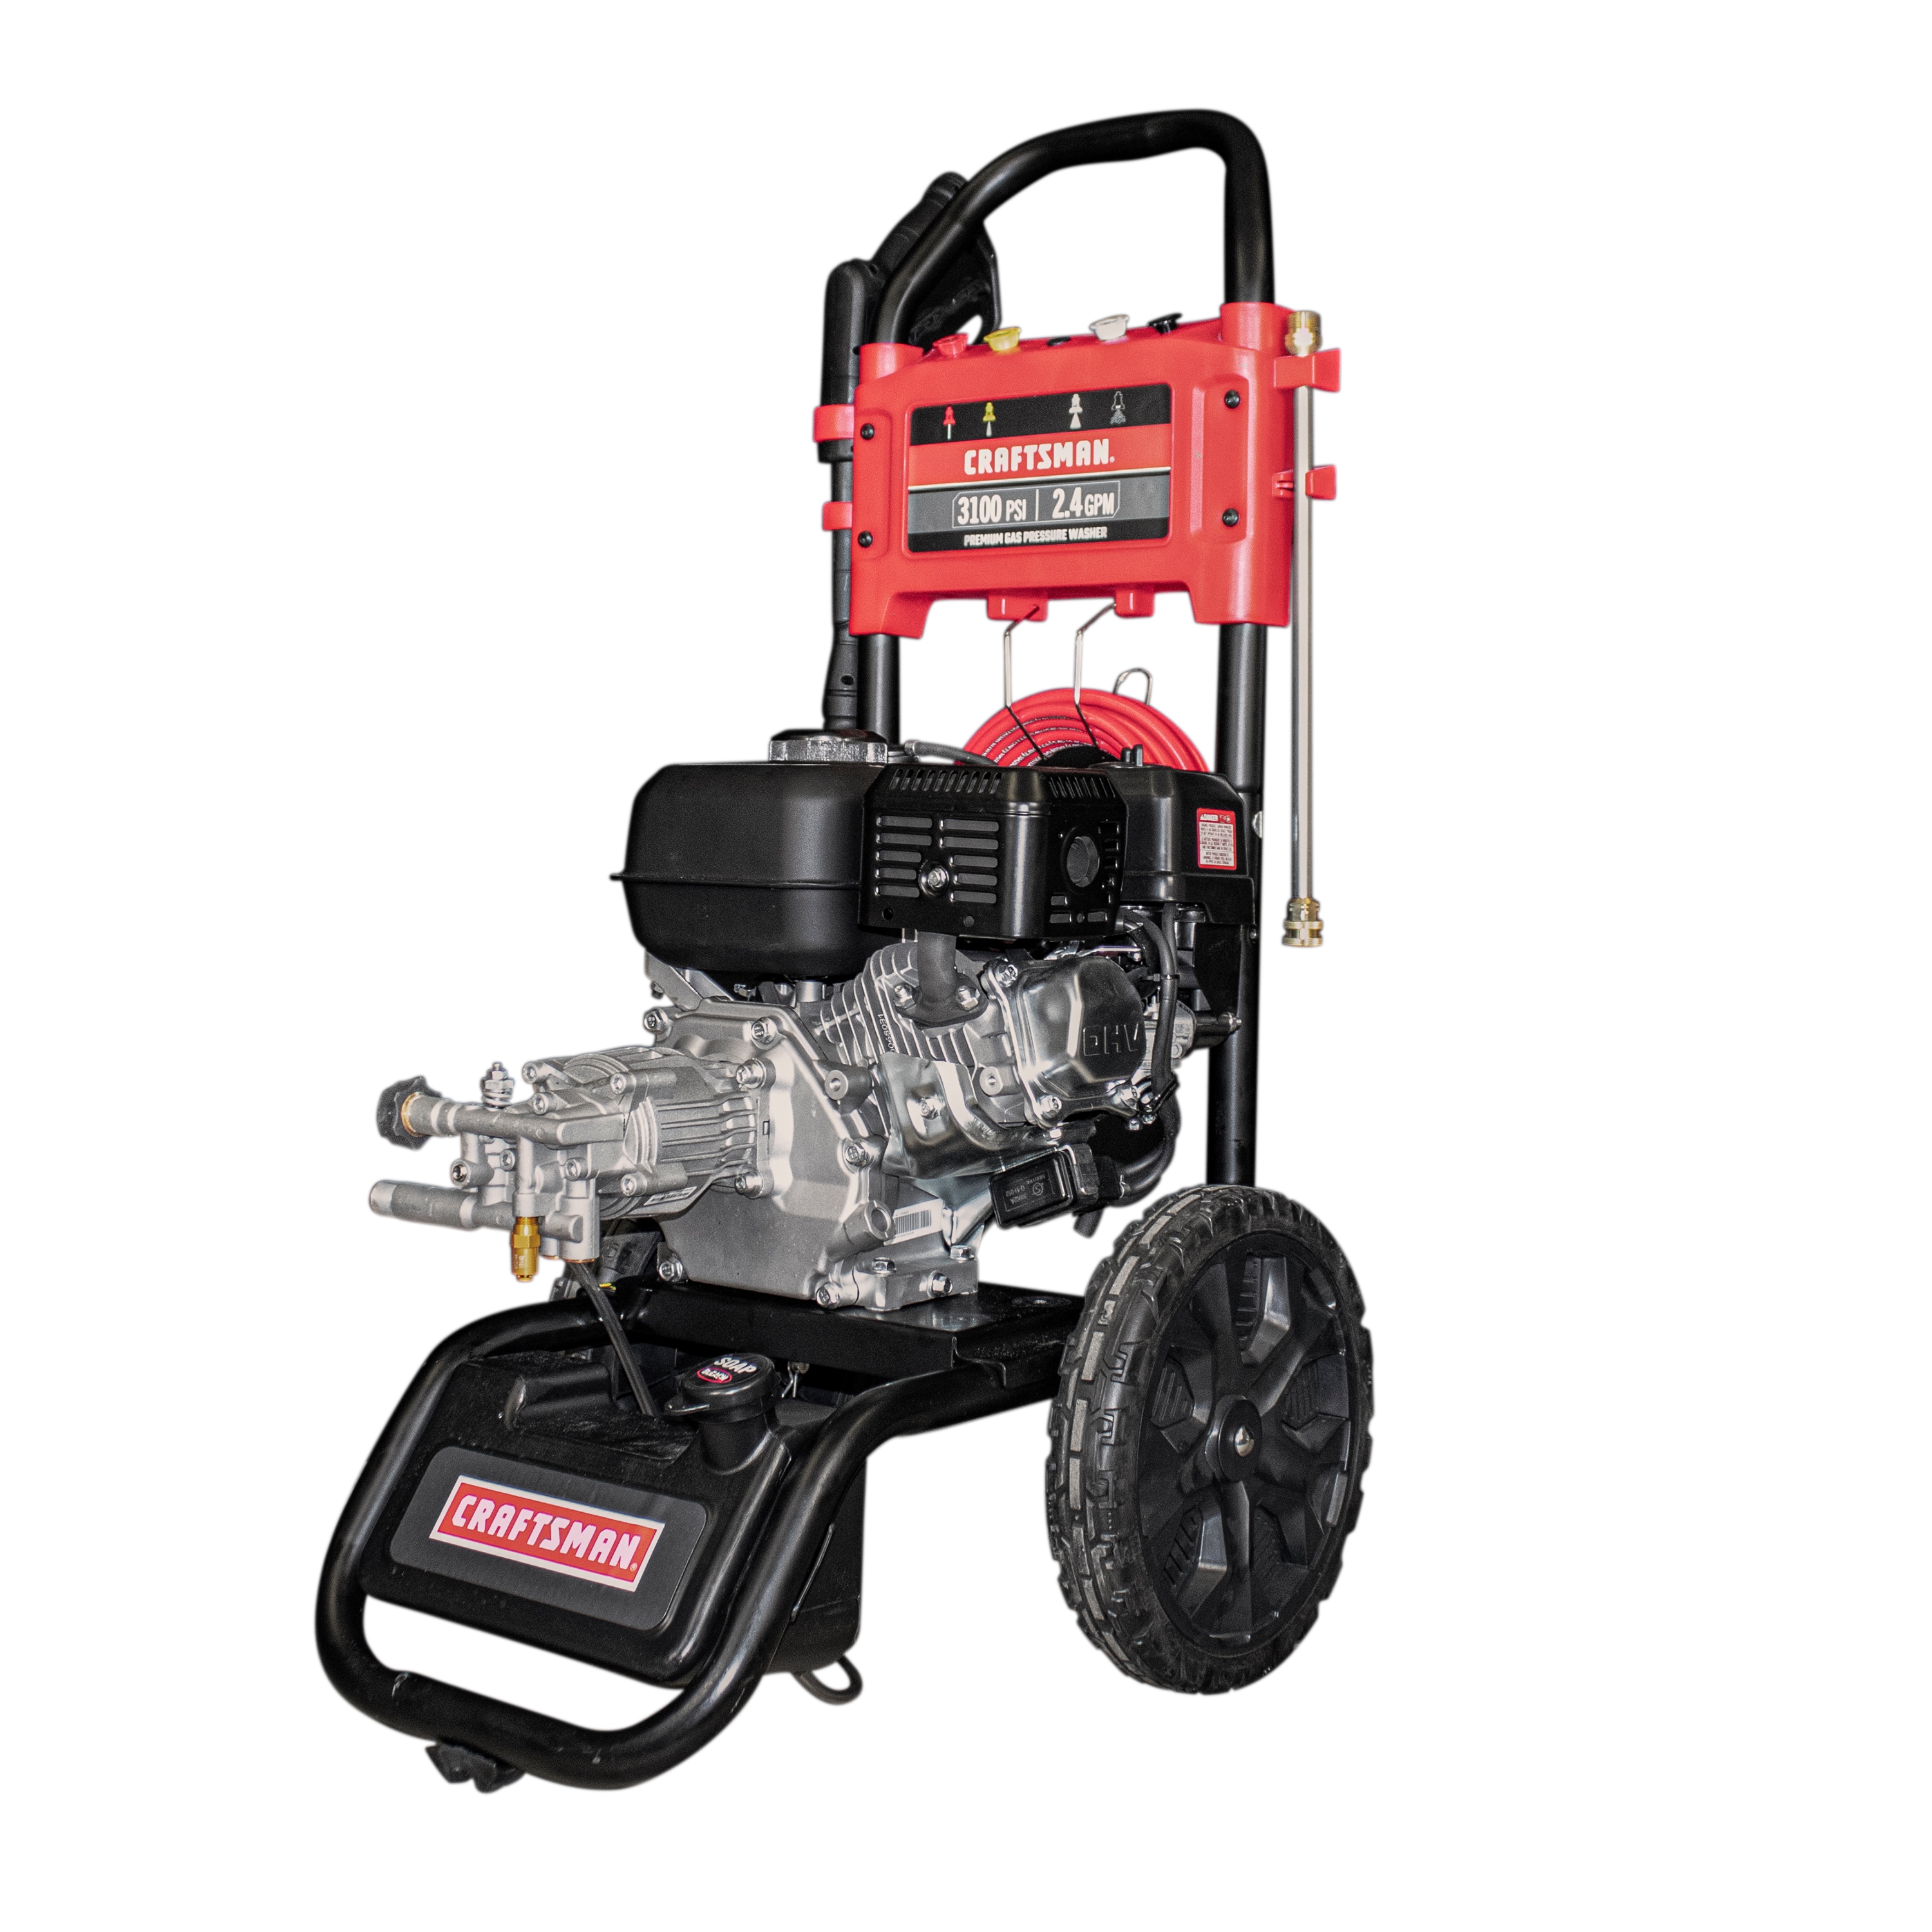 Heavy-duty Pressure Washers & Accessories at